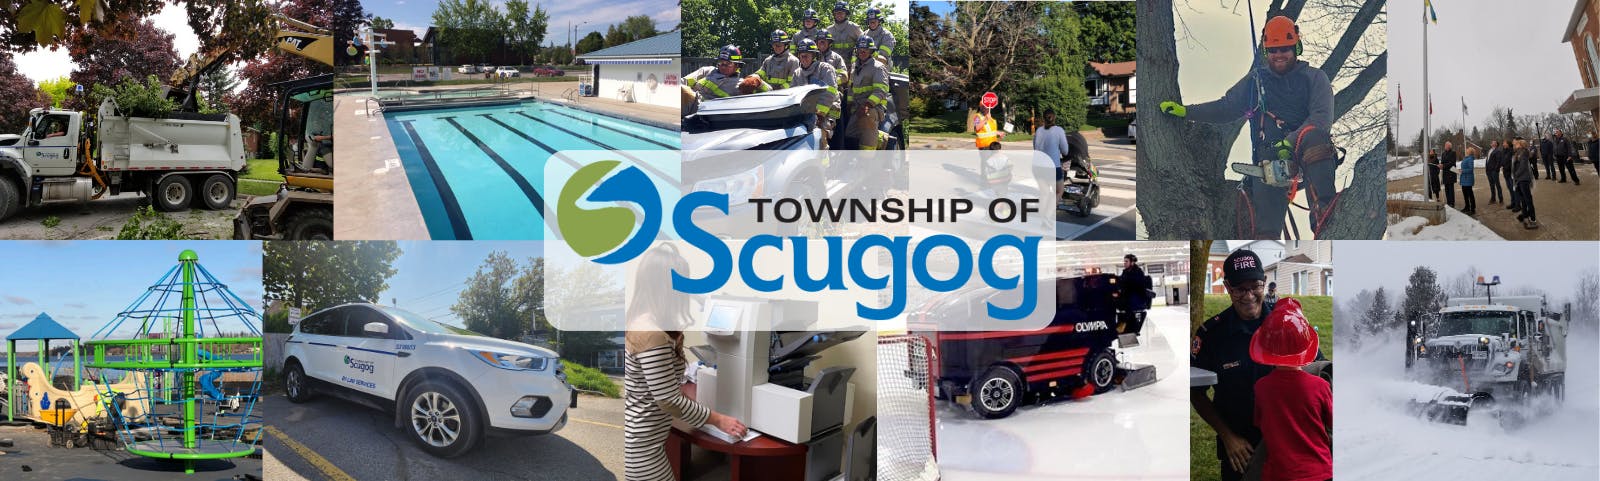 collage of photos of Township services with logo overlayed